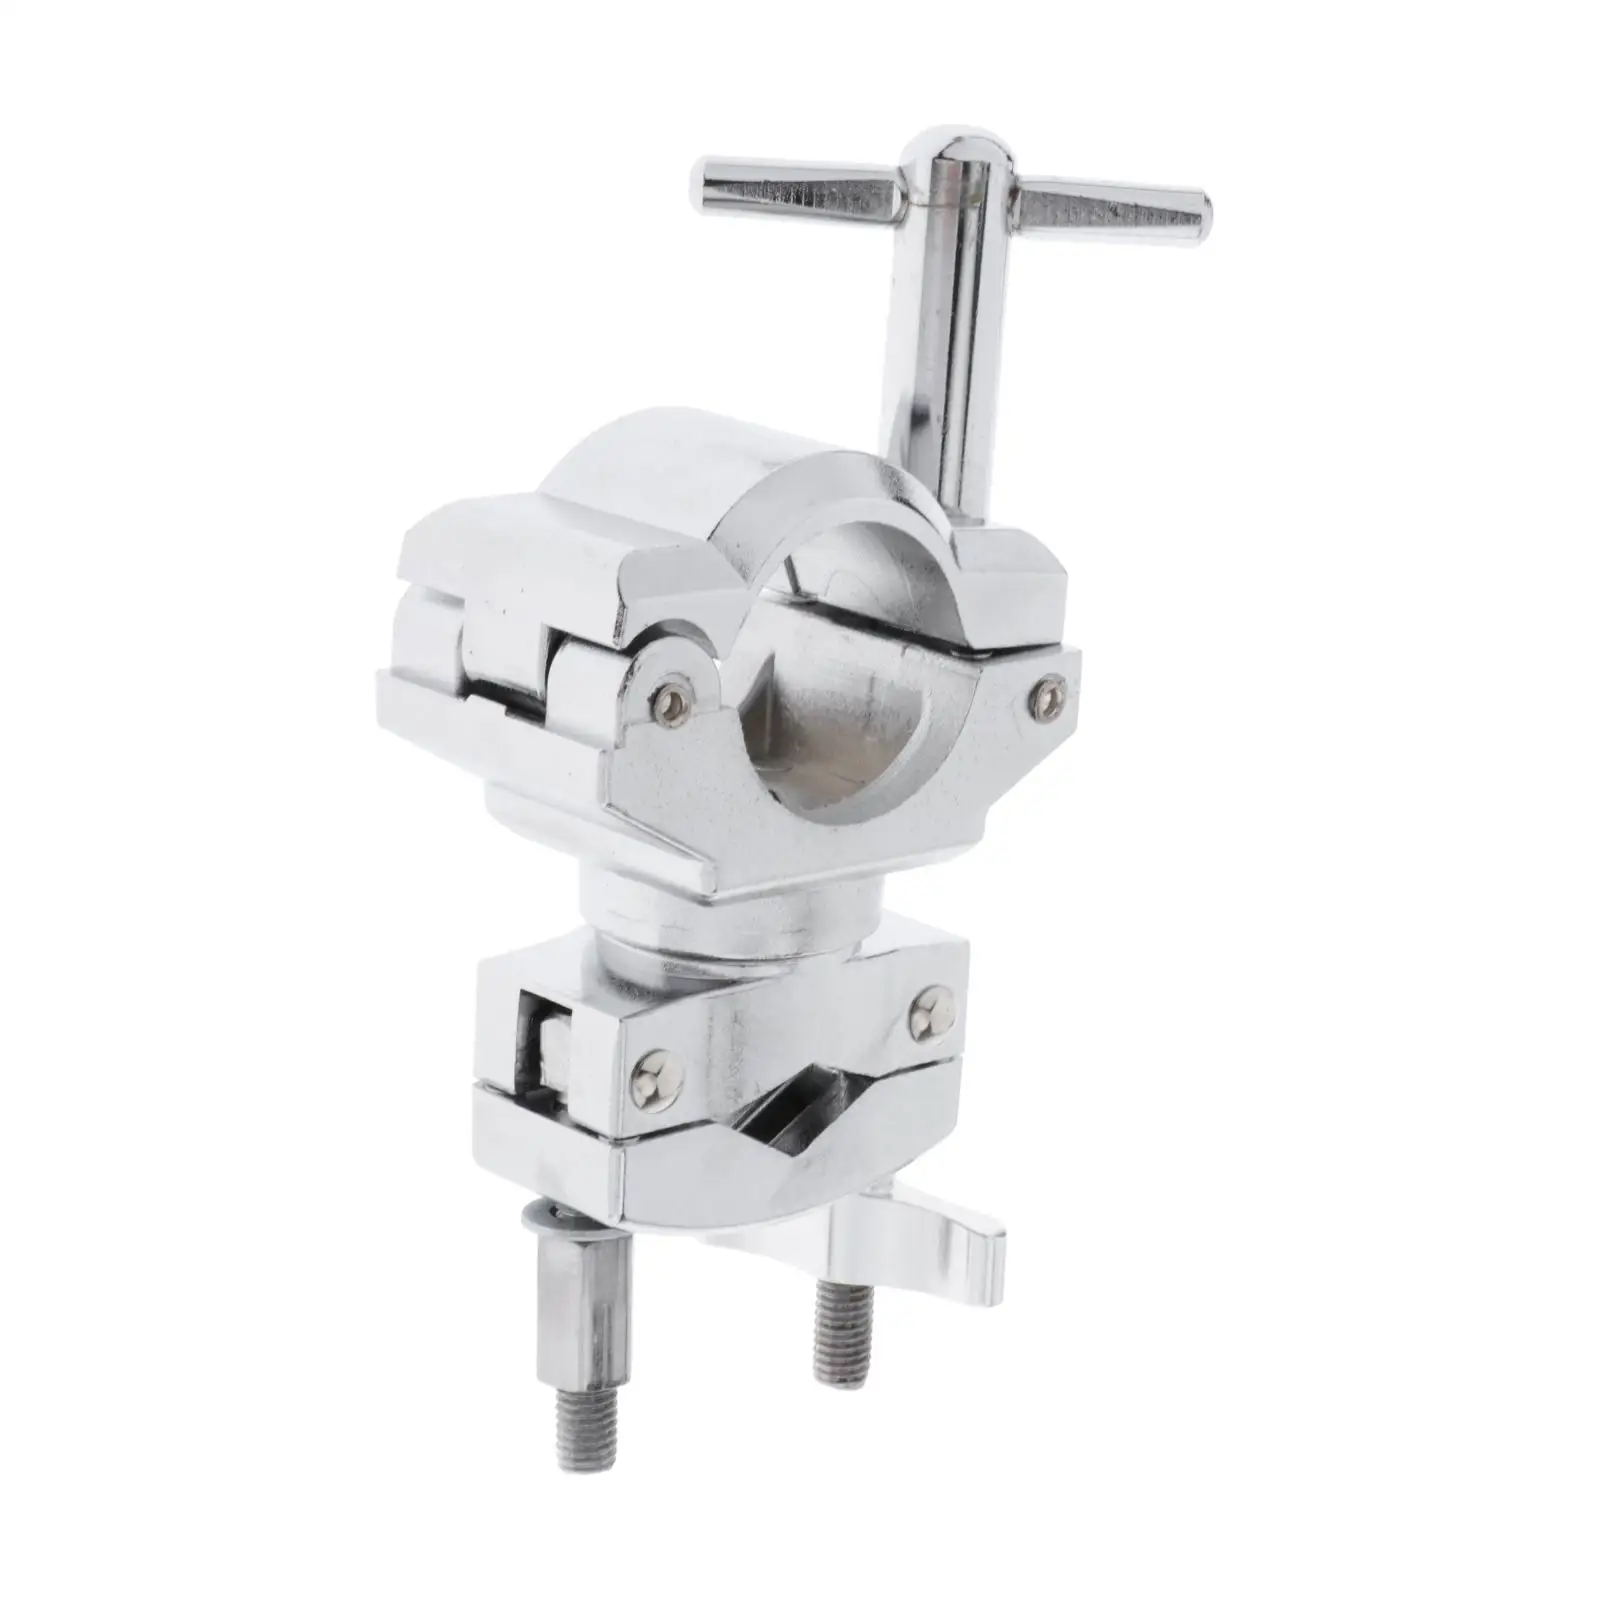 Zinc Alloy Snare Drum Throw Off Clamp Strainer Regulator with Mounting Screws Silver Drum Strainer for Drum-player